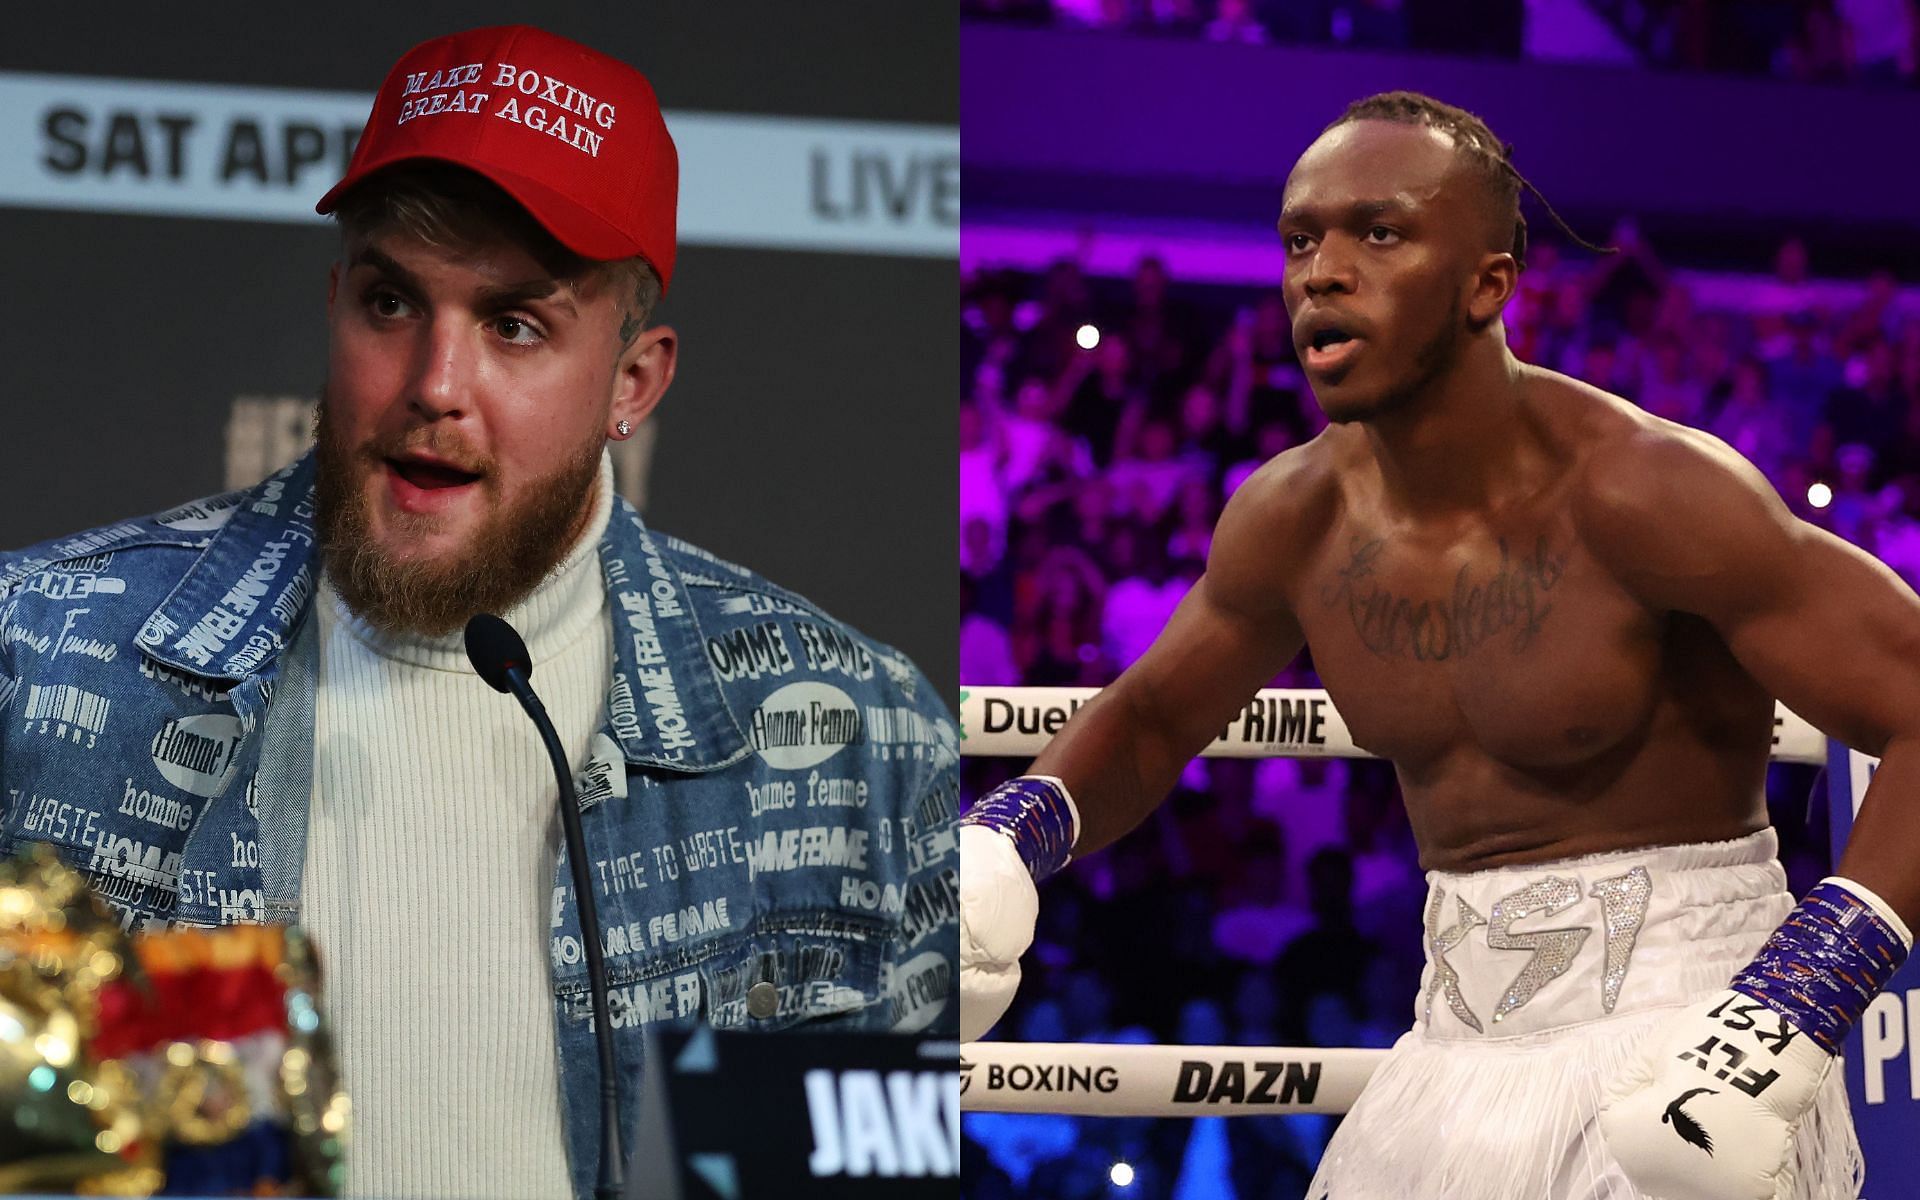 Jake Paul (left) and KSI (right) (Image credits Getty Images)